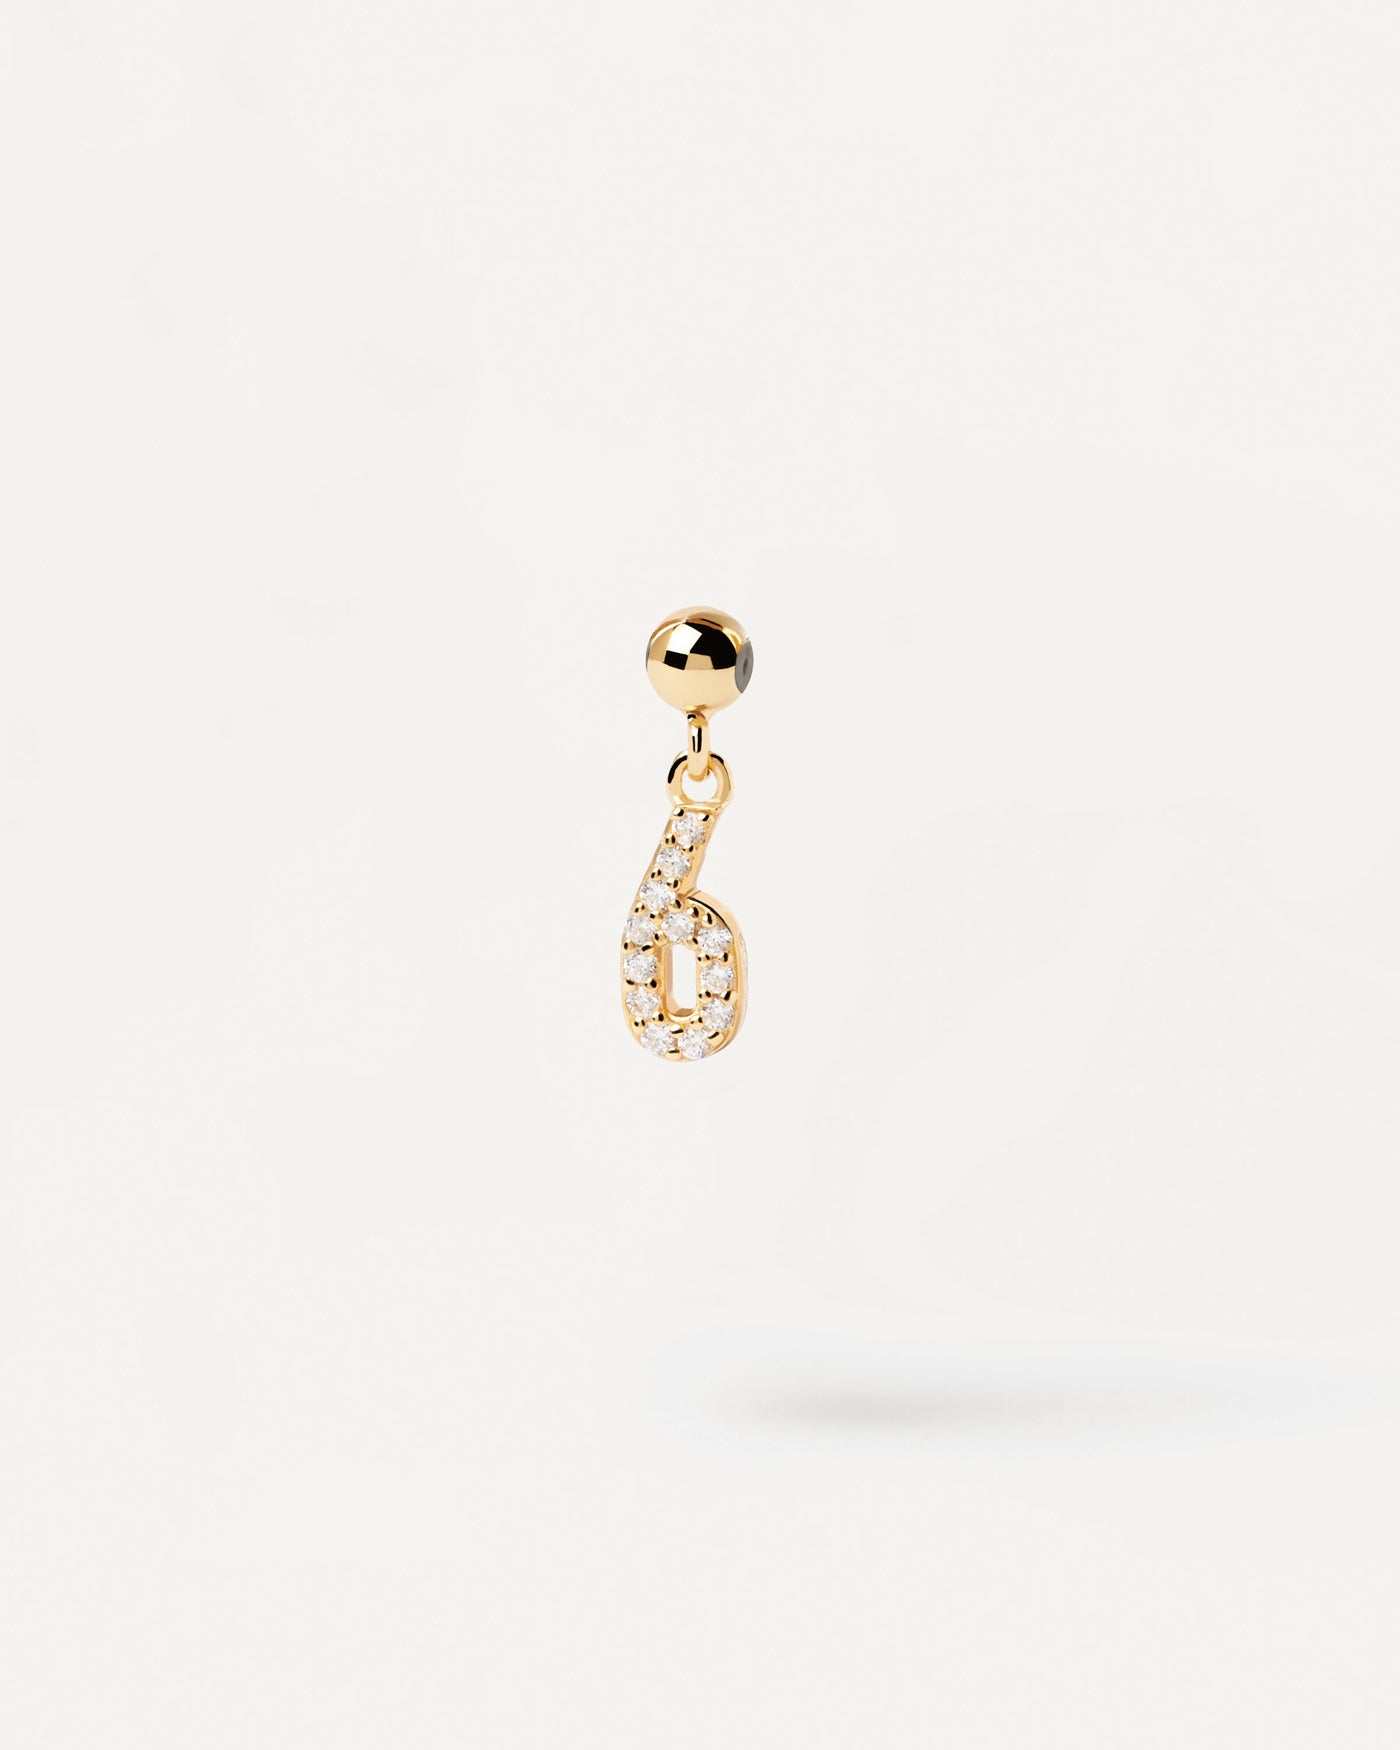 2023 Selection | Number 6 Charm. Gold-plated silver 6 number for Charm necklace or bracelet with white zirconia. Get the latest arrival from PDPAOLA. Place your order safely and get this Best Seller. Free Shipping.